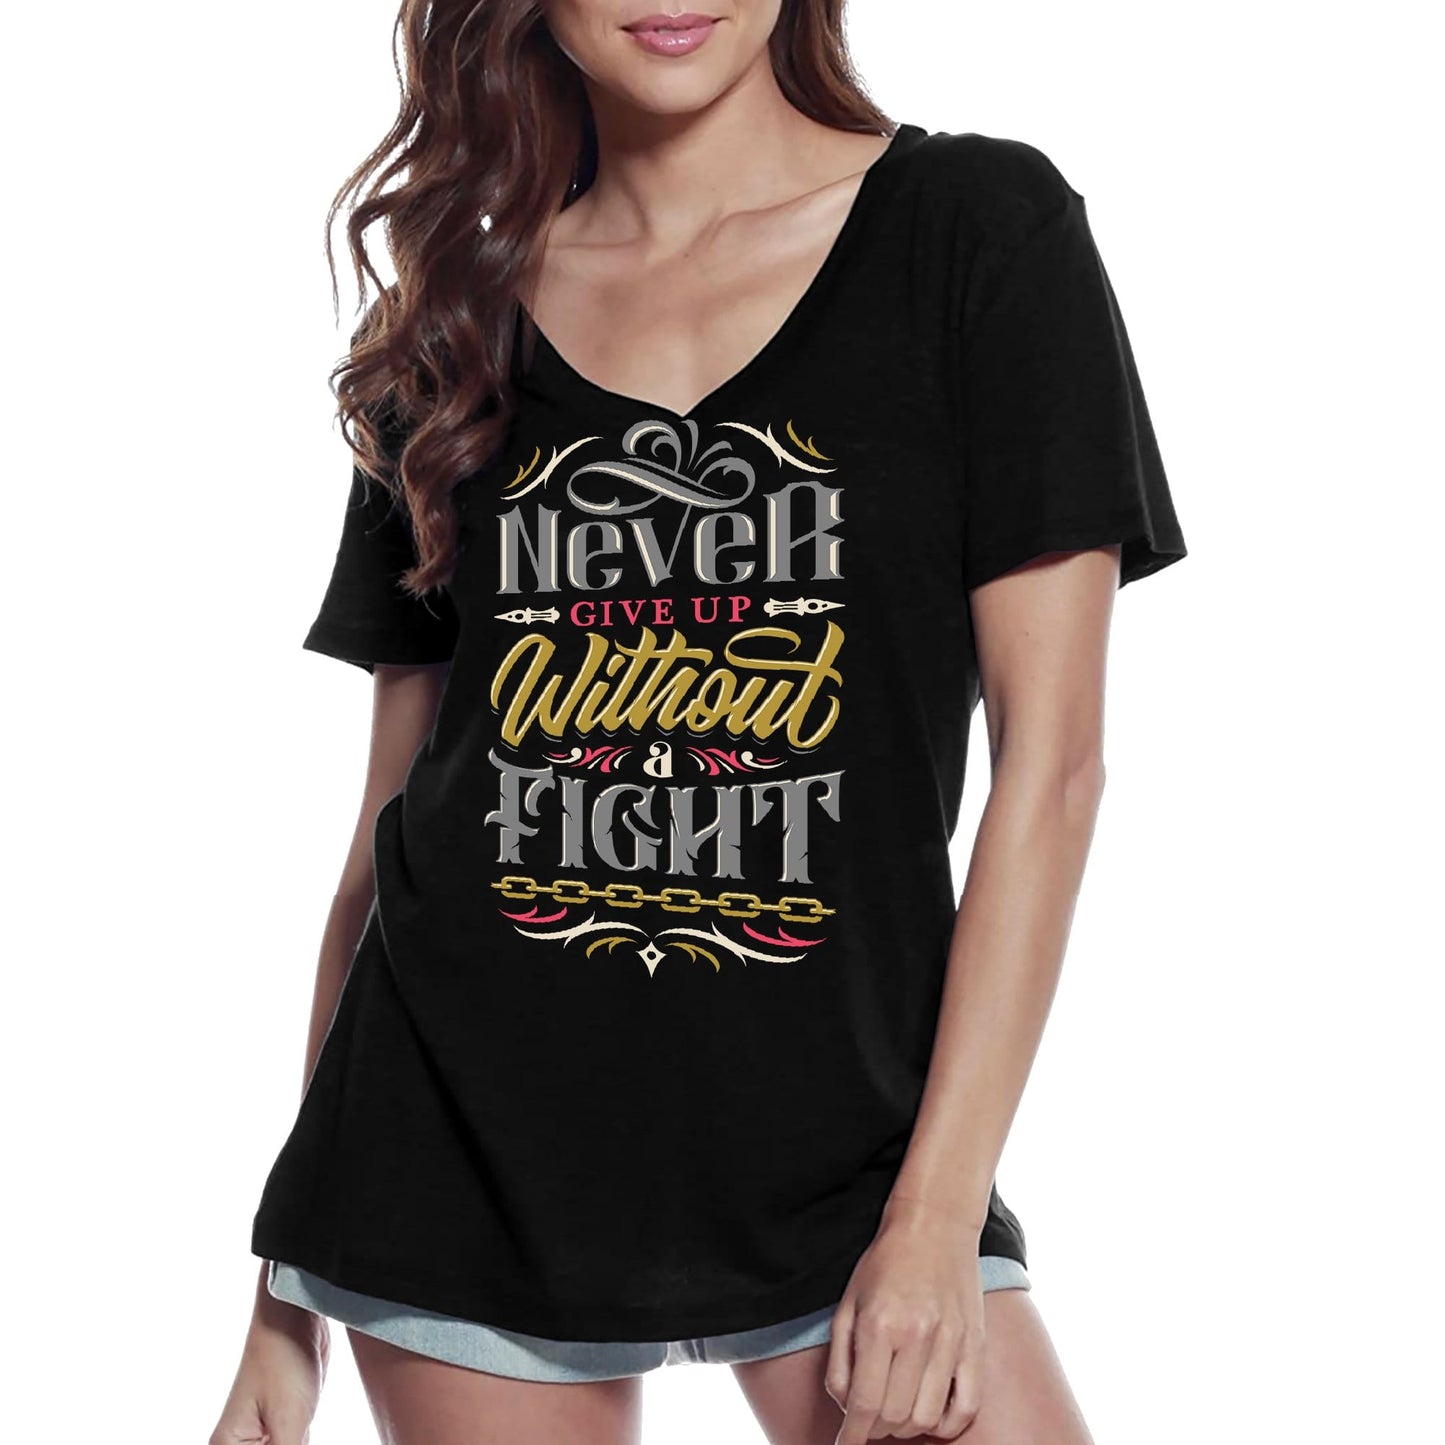 ULTRABASIC Women's V-Neck T-Shirt Never Give Up Without A Fight - Short Sleeve Tee shirt